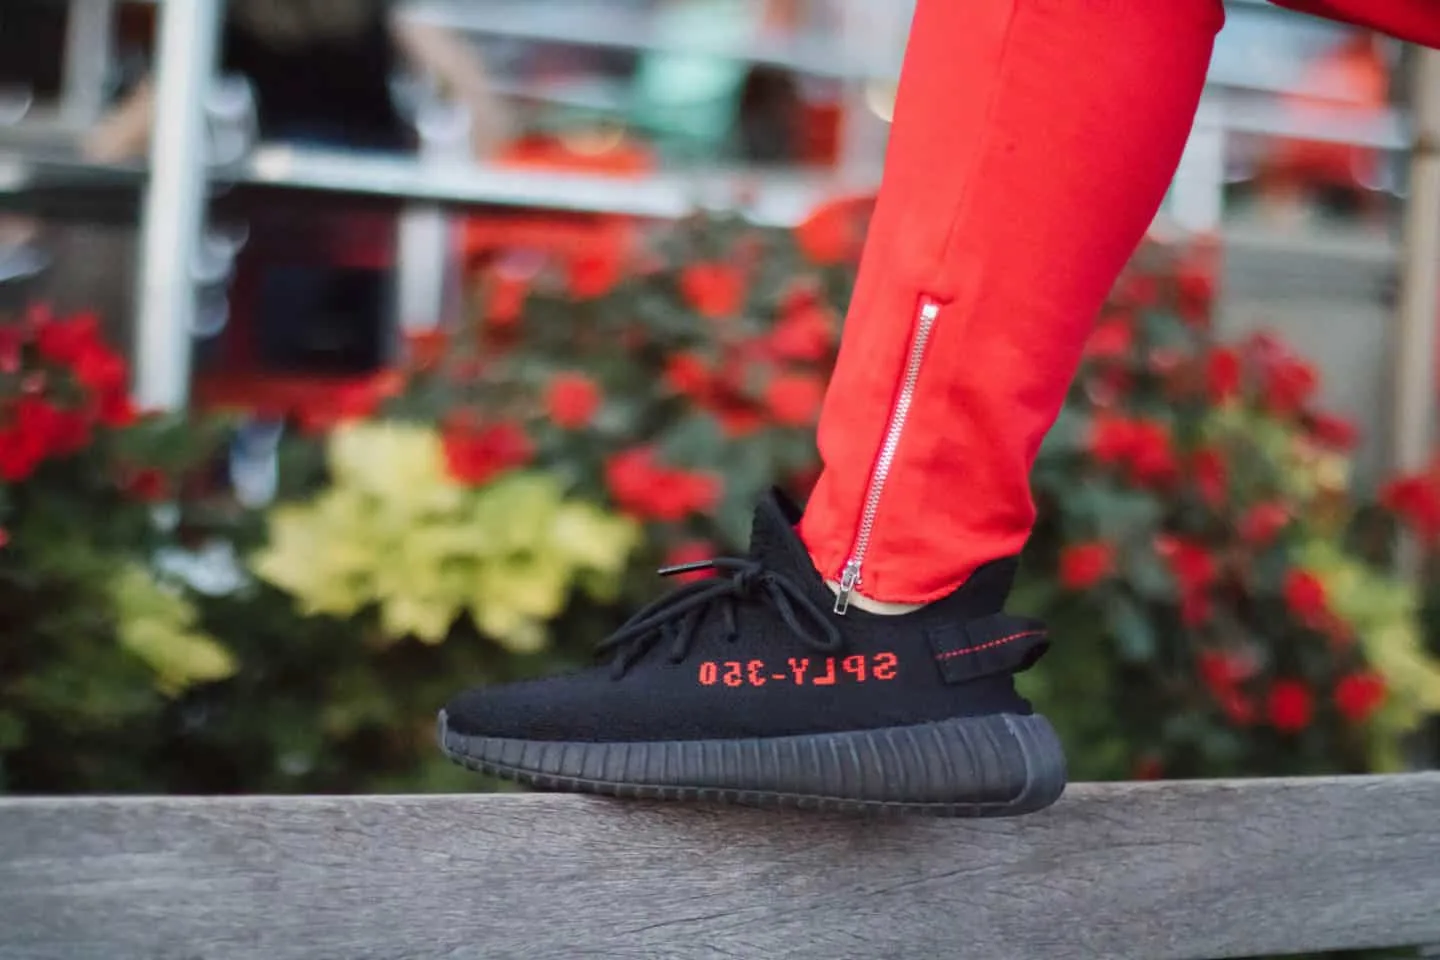 How to style Adidas Yeezy Boosts for girls, plus tips on how to score your own Yeezys!